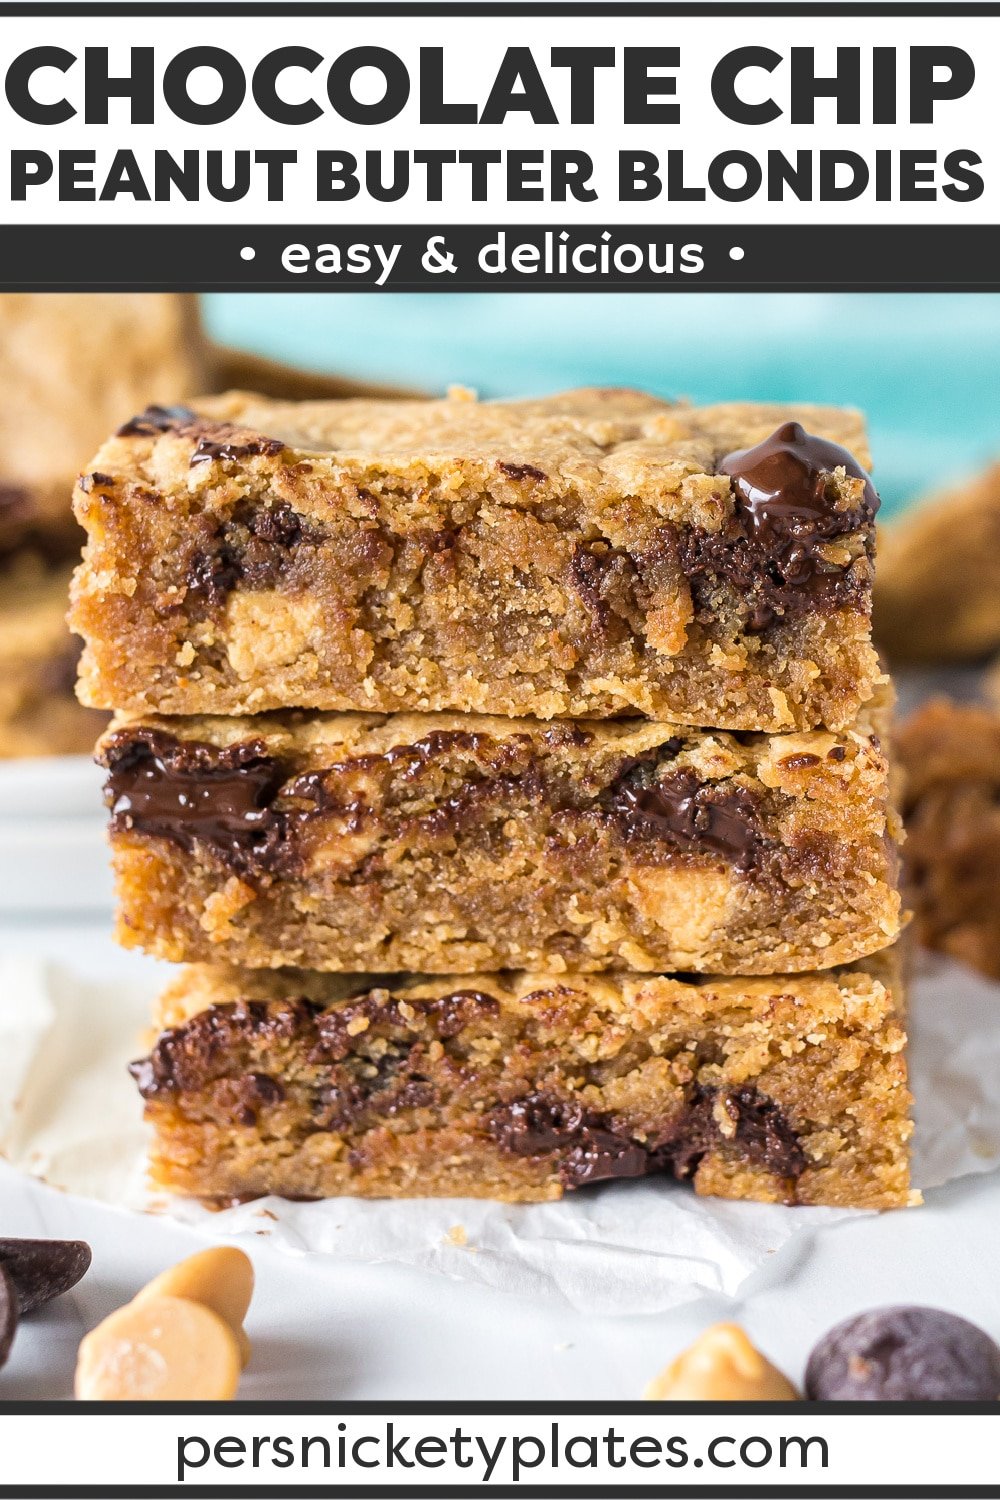 Peanut Butter Blondies filled with chocolate and peanut butter chips are soft, chewy, and begging to be topped with vanilla ice cream! | www.persnicketyplates.com